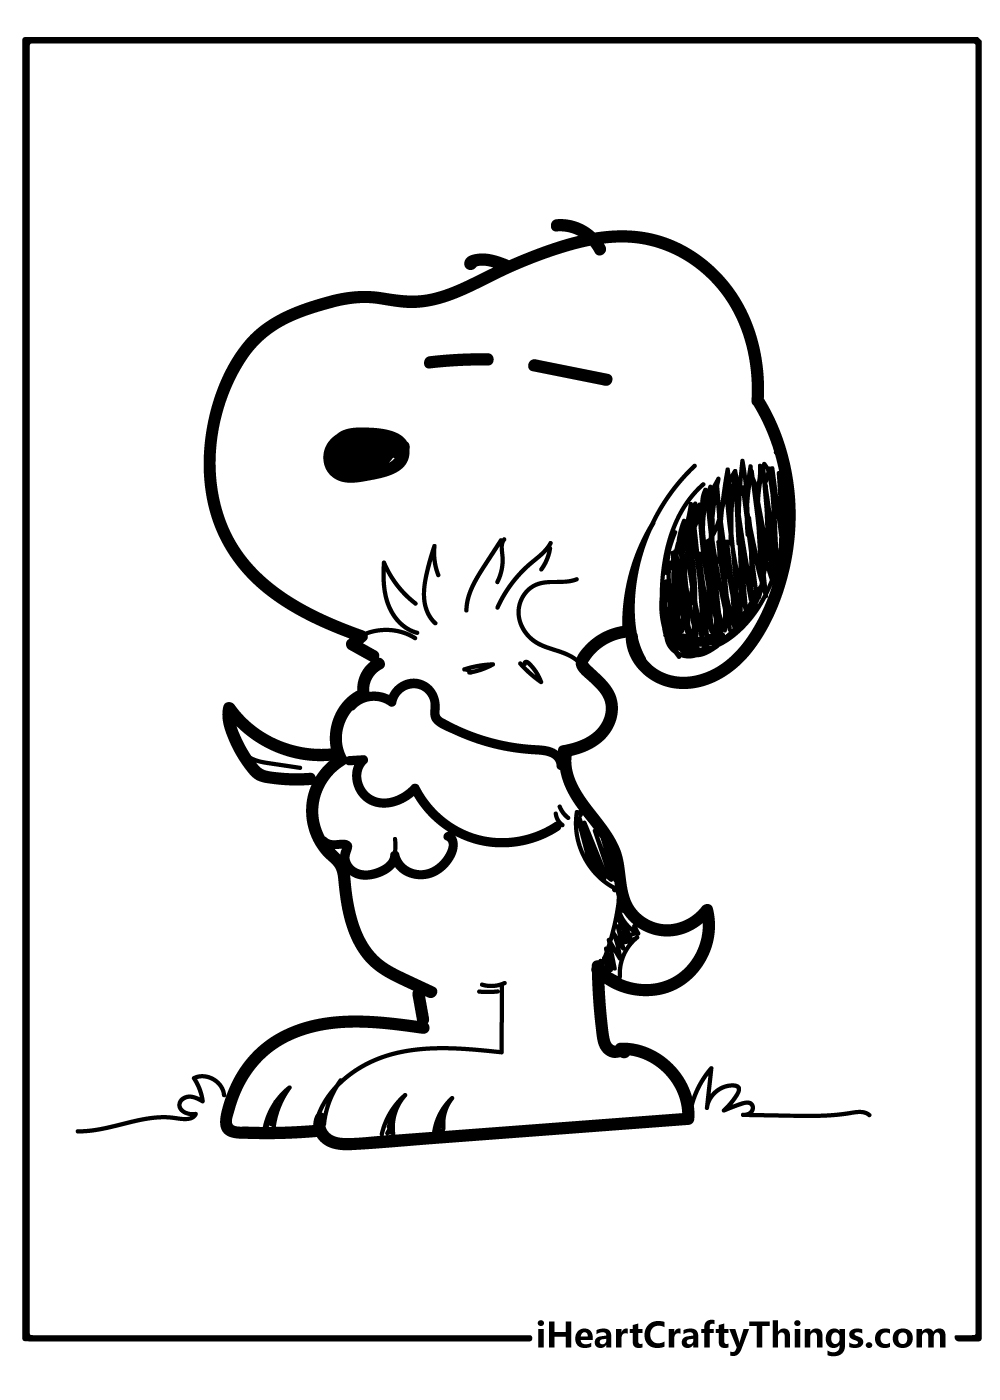 Snoopy coloring pages free printables